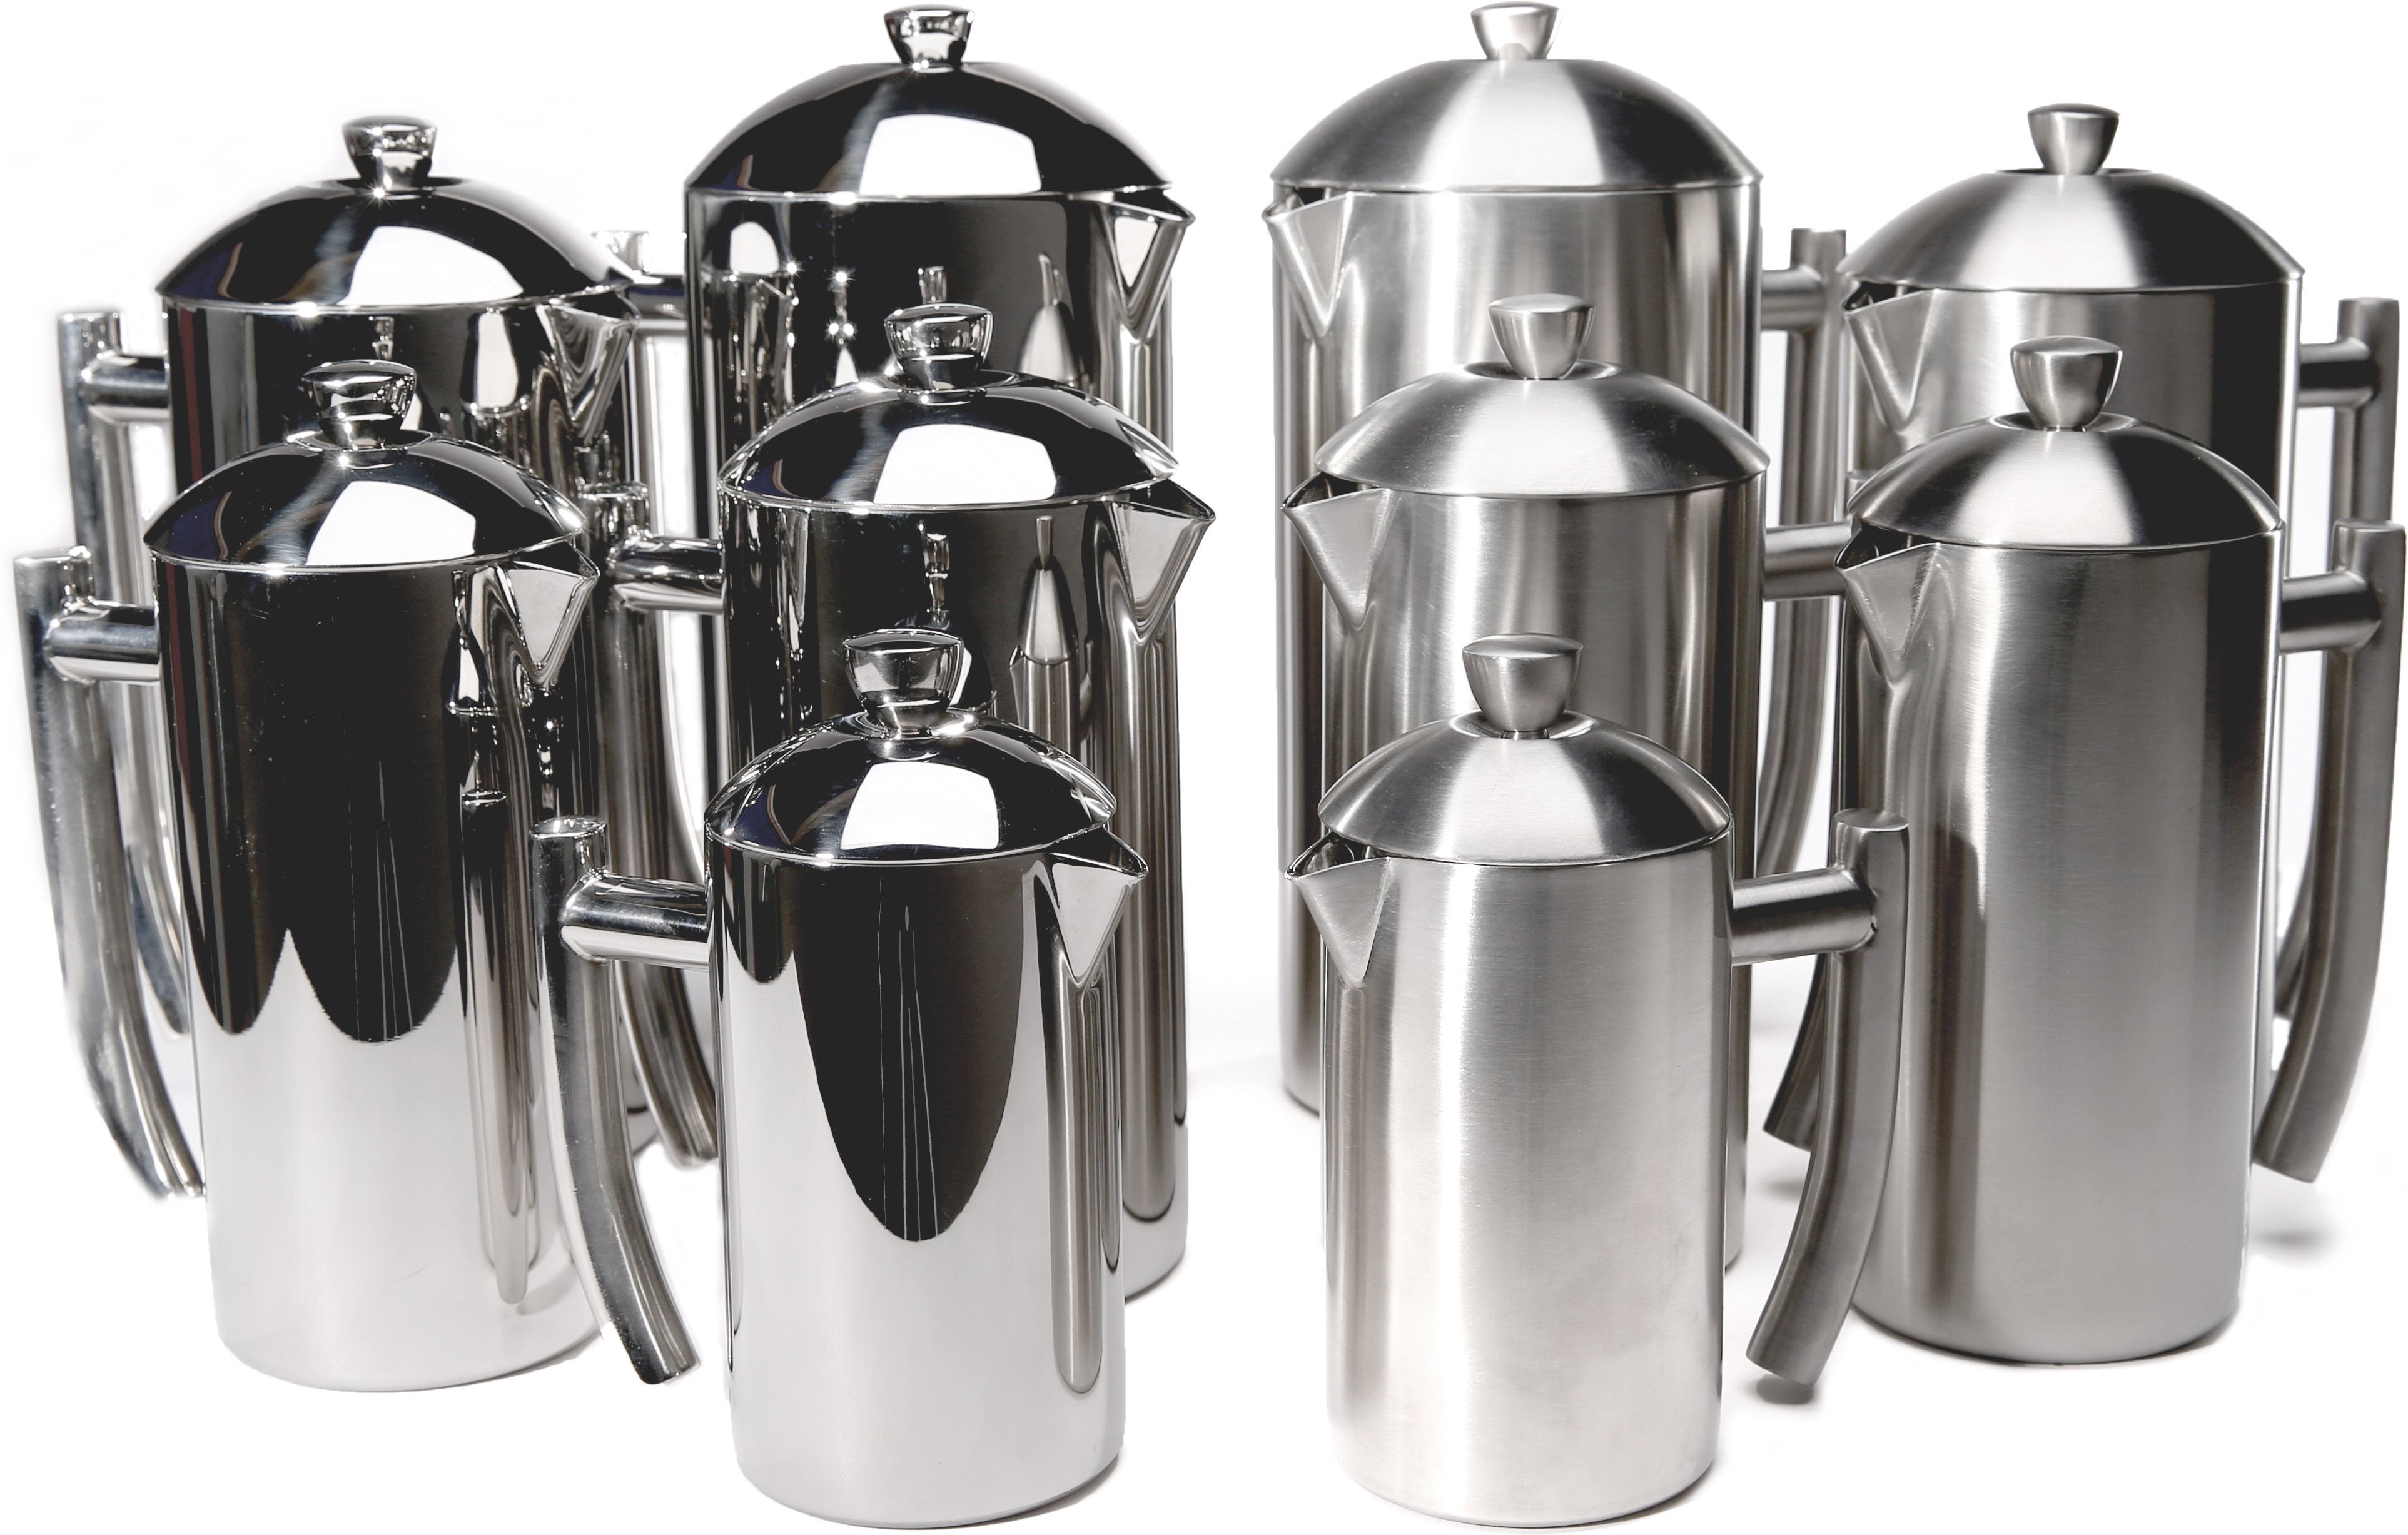 Frieling Double-Walled French Press, 6 colors, Dishwasher Safe on Food52